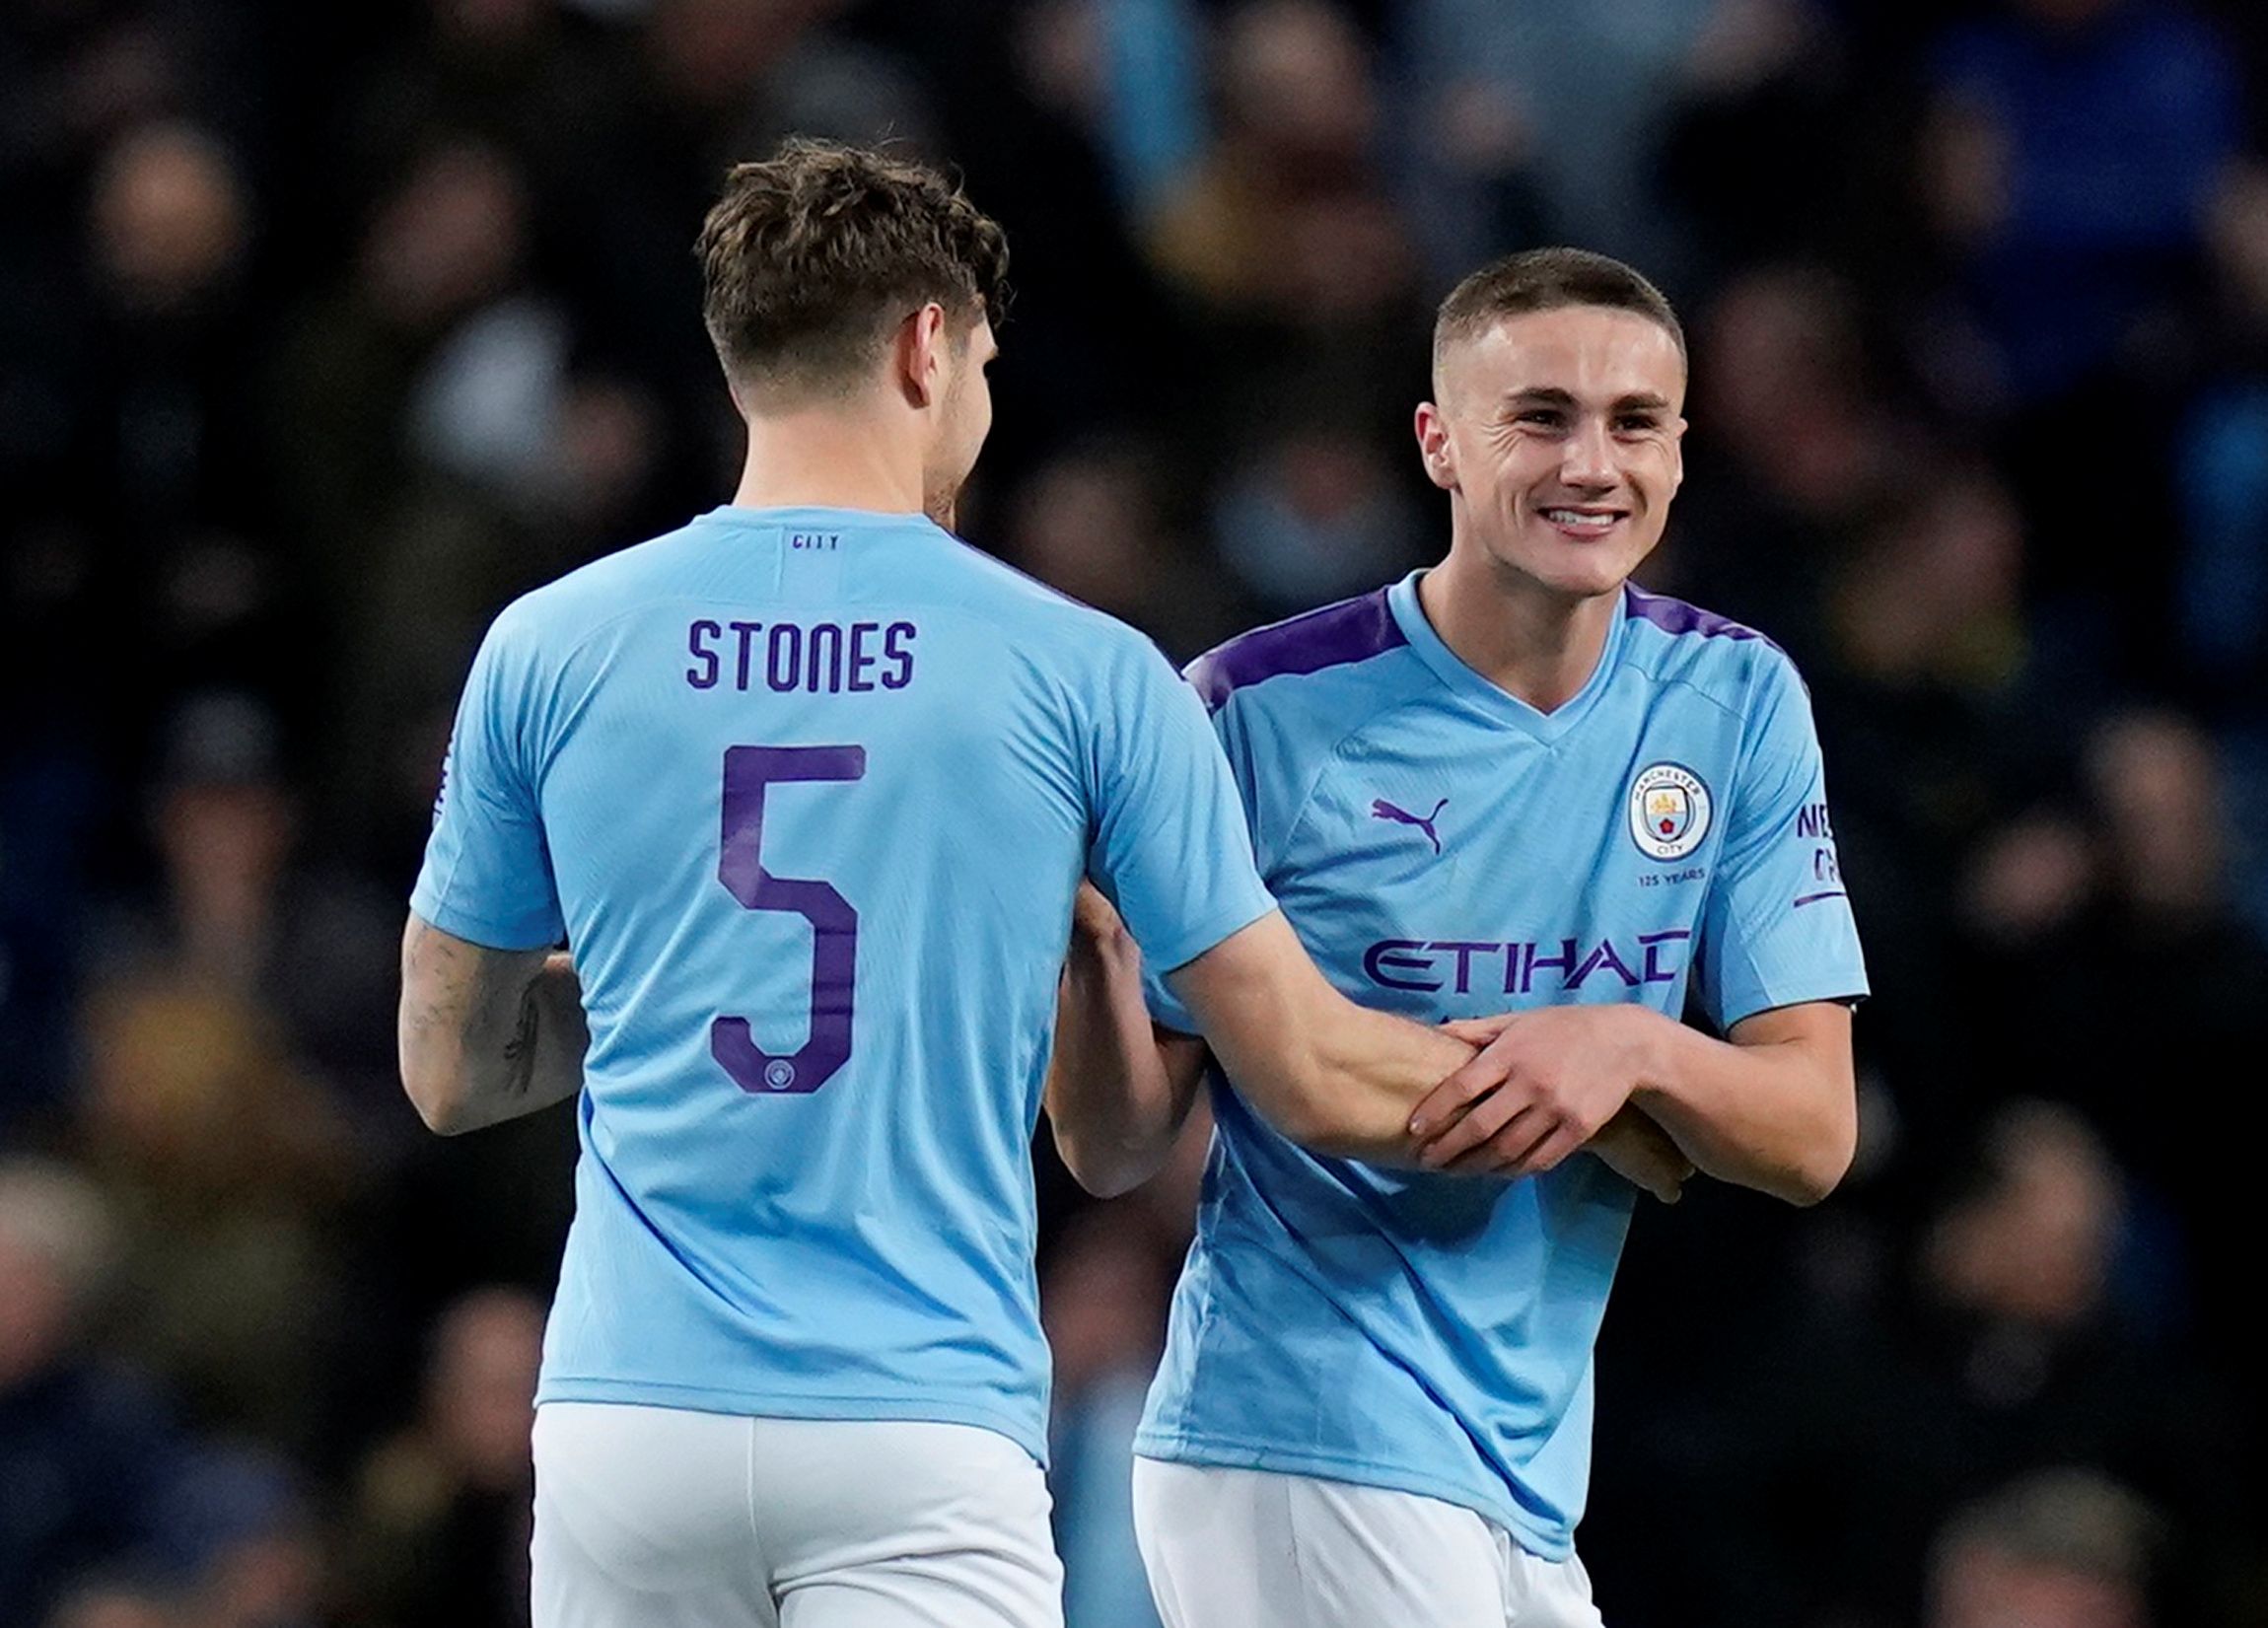 Soccer Football - FA Cup - Third Round - Manchester City v Port Vale - Etihad Stadium, Manchester, Britain - January 4, 2020  Manchester City's Taylor Harwood-Bellis celebrates scoring their third goal with John Stones   REUTERS/Andrew Yates